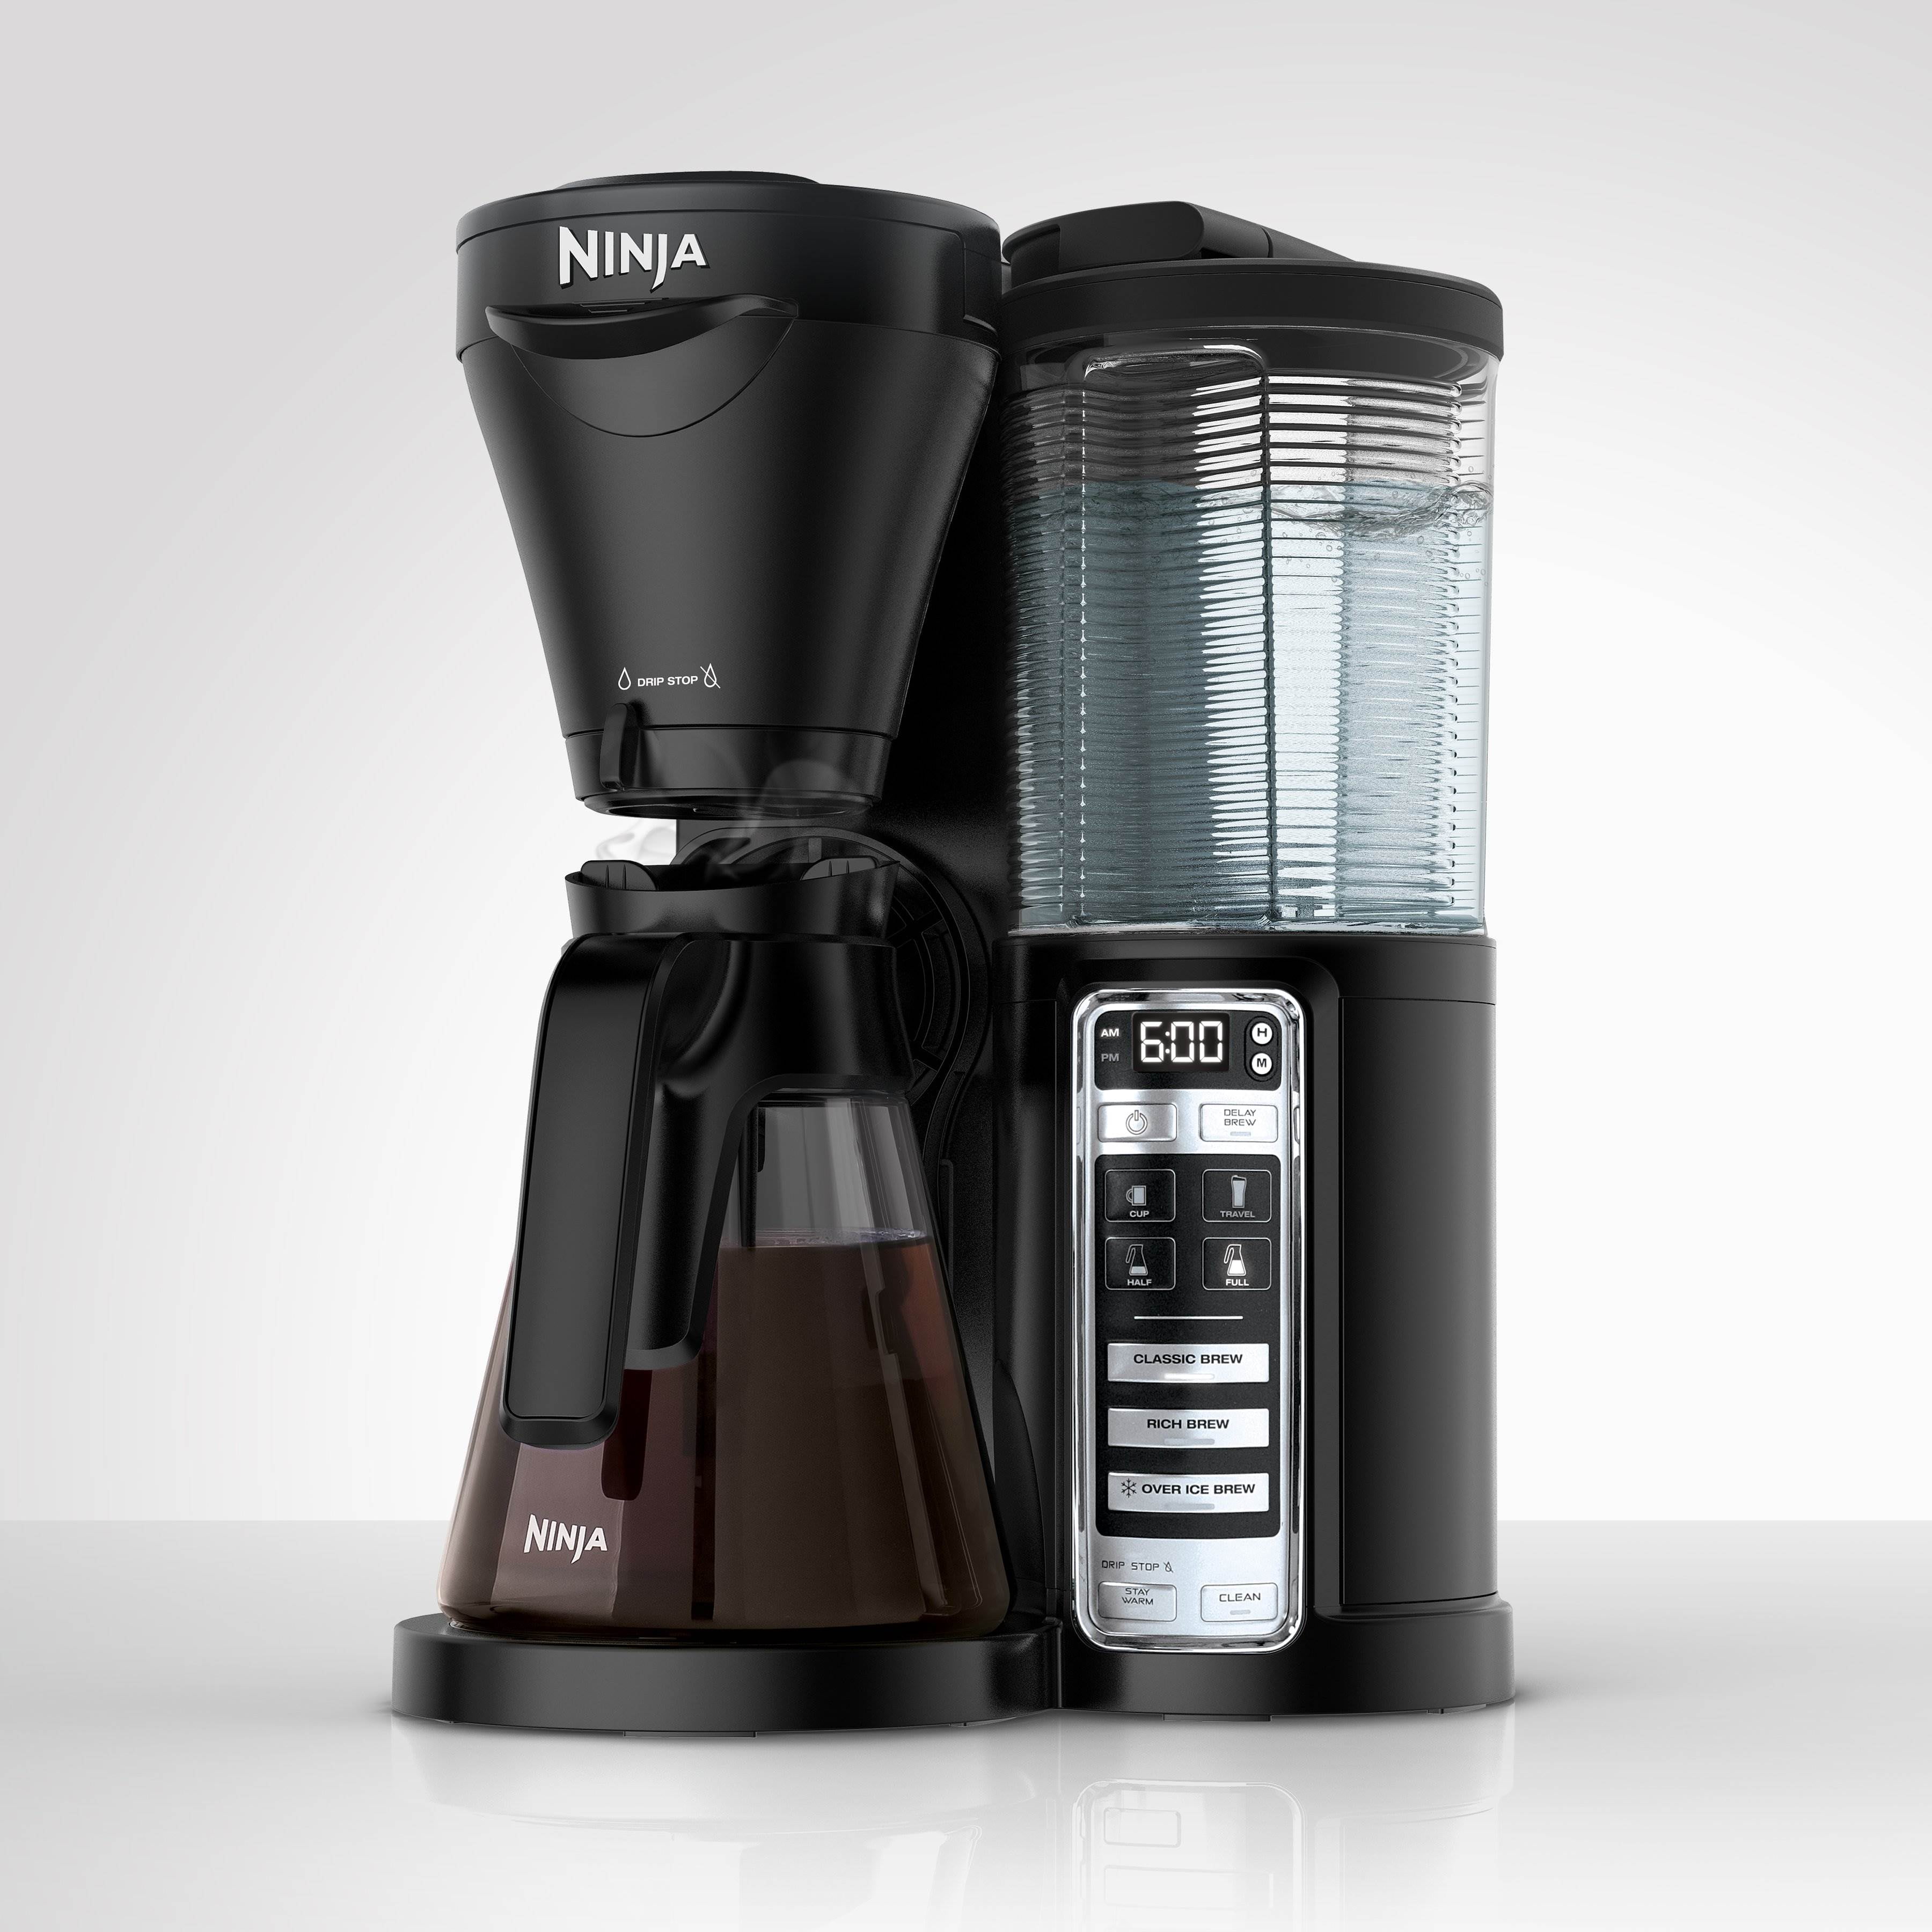 Cappucino, cappuccino, countertop, coffeemaker, Trust us—skip the  drive-thru line and make the cappuccino at home. ☕️ The Ninja Pods & Grounds  Specialty Coffee Maker unlocks ultimate countertop